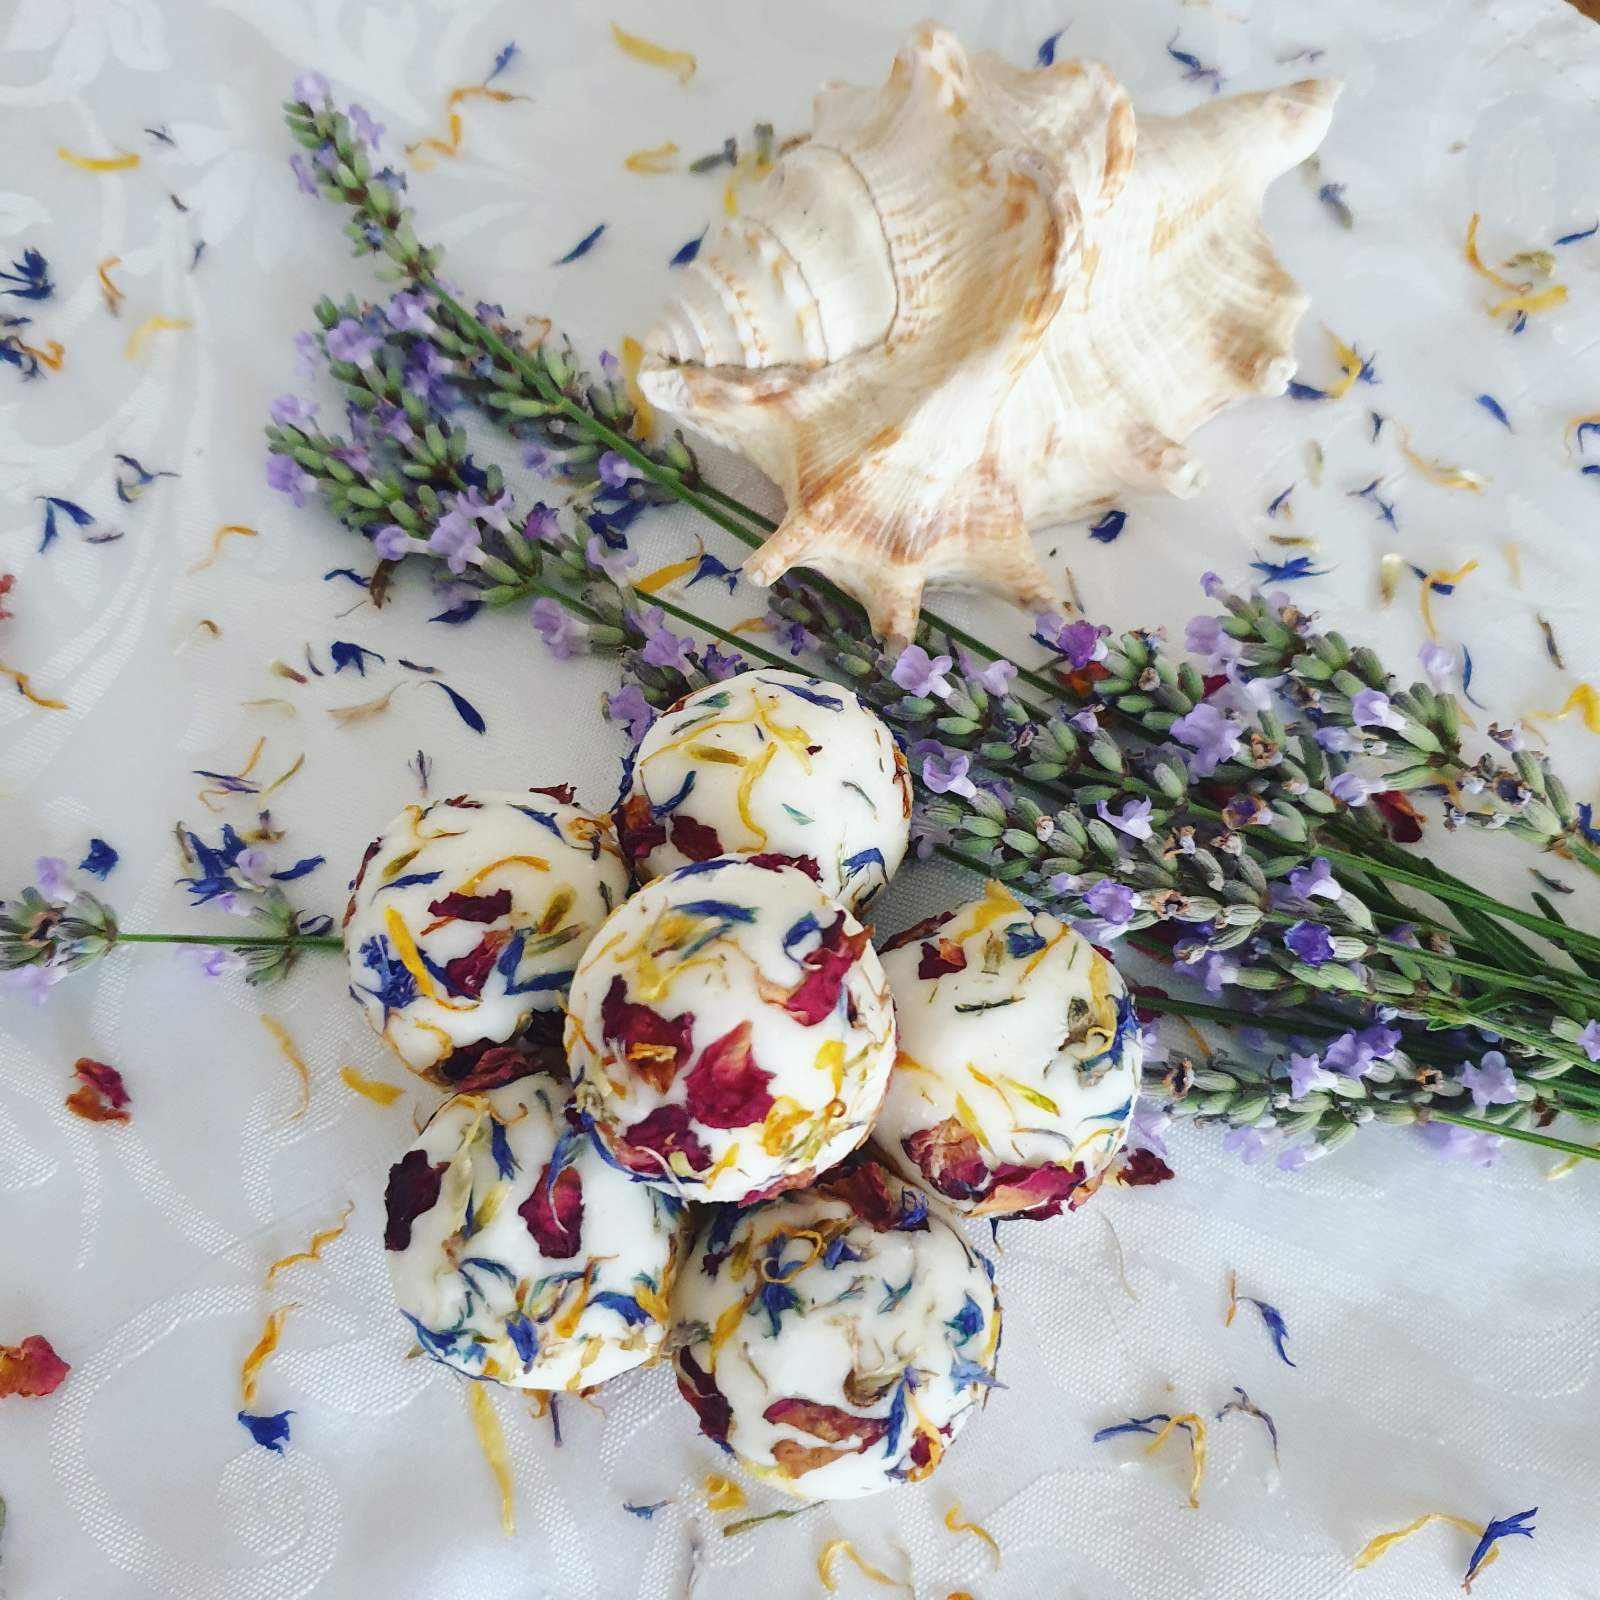 The Eden Collections floral scented bath creamers, showcased alongside lavender, petals and seashells.